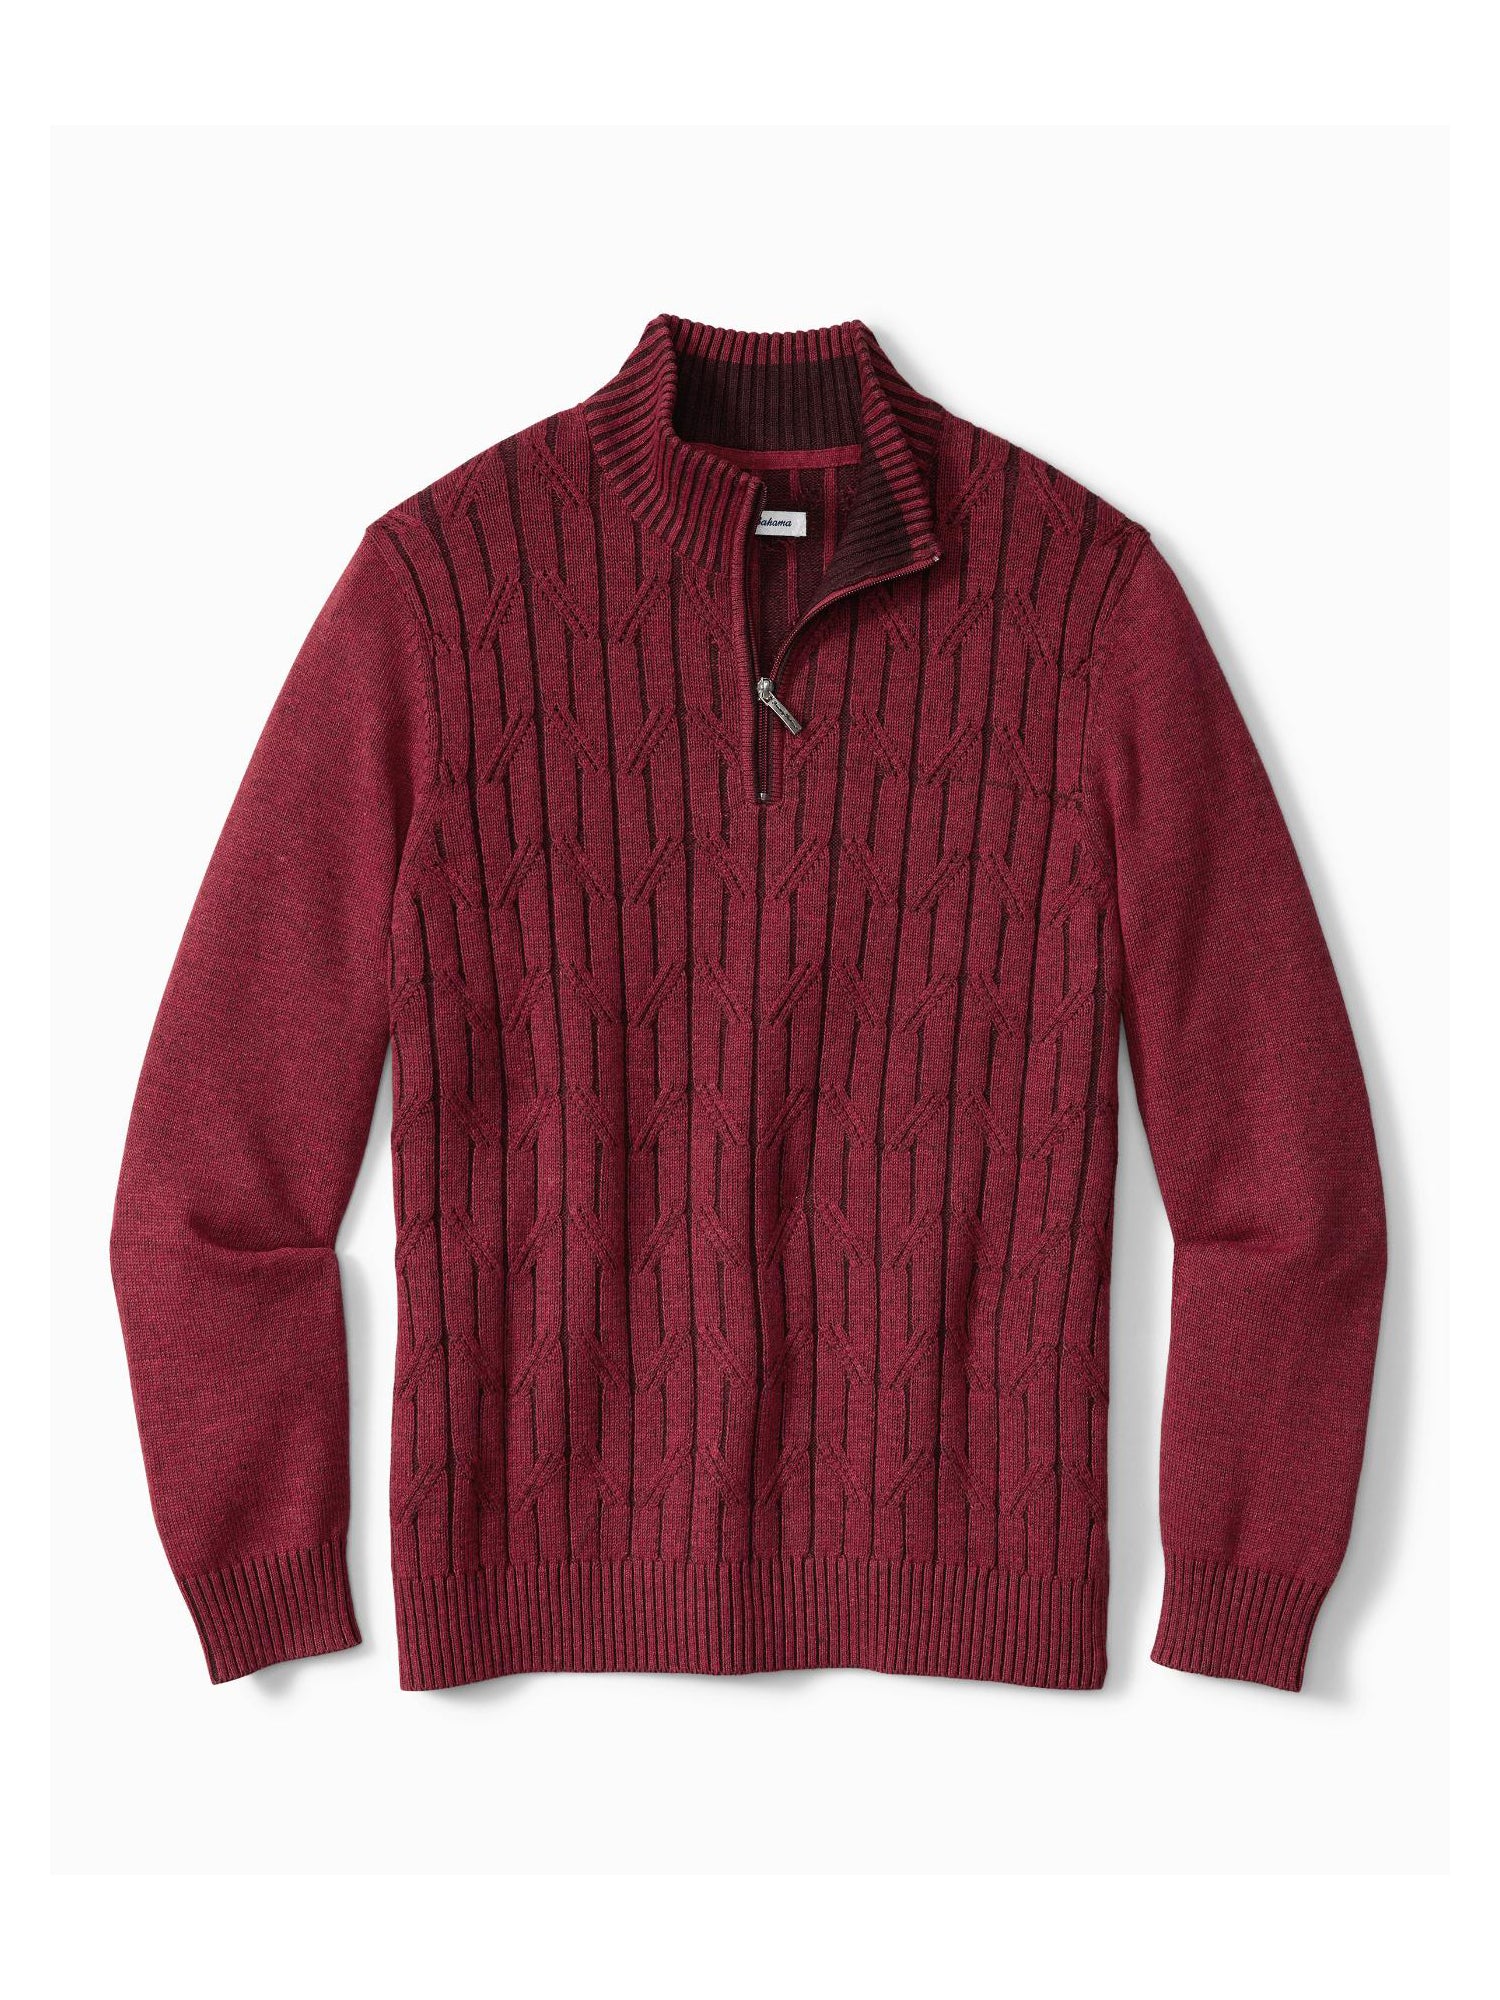 Tommy Bahama Deep Sea Half Zip Cable Sweater in Cherry Stone